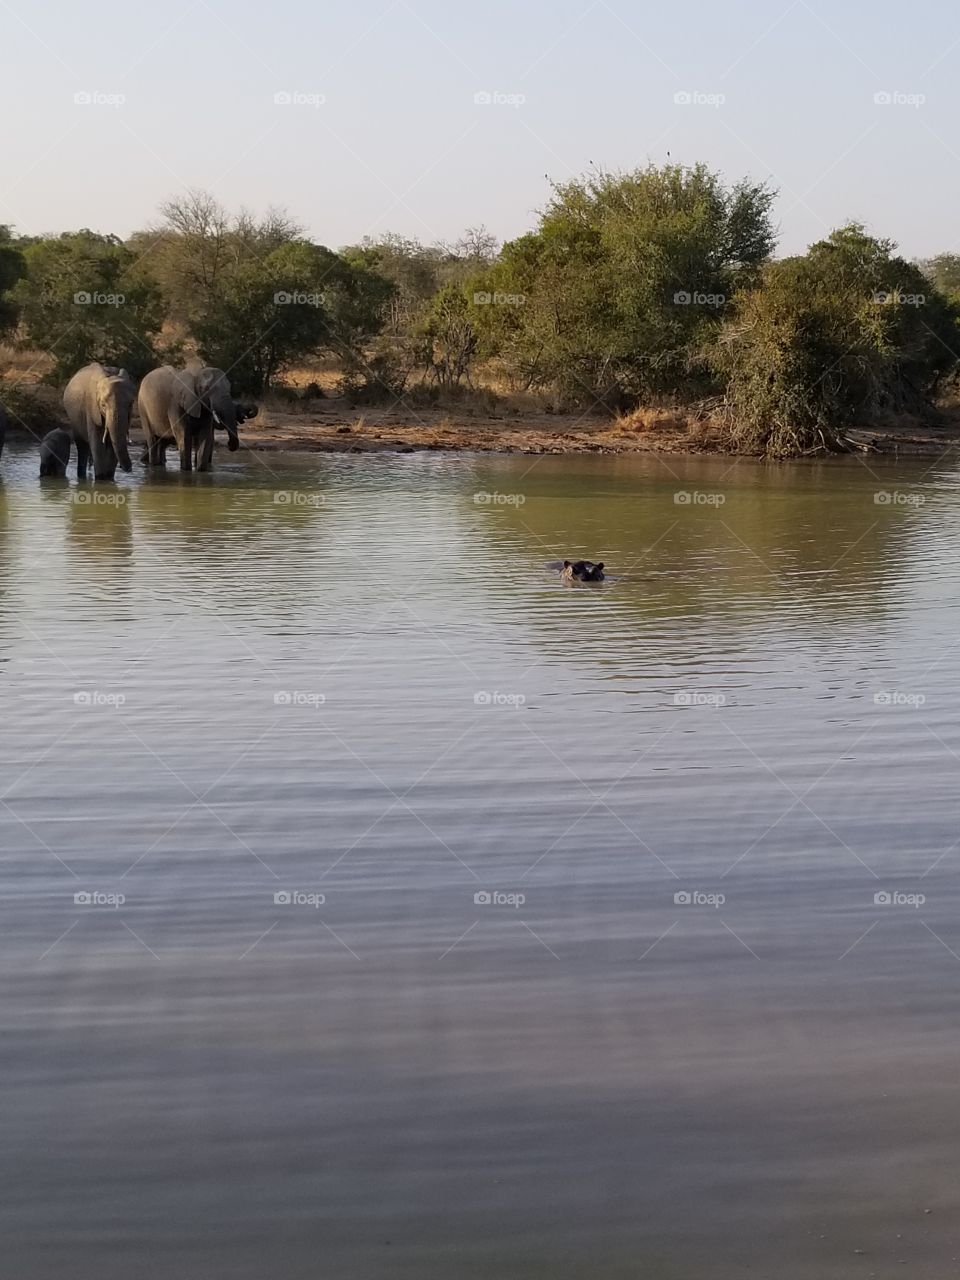 Elephants drinking for the watering hole, as a hippo swims